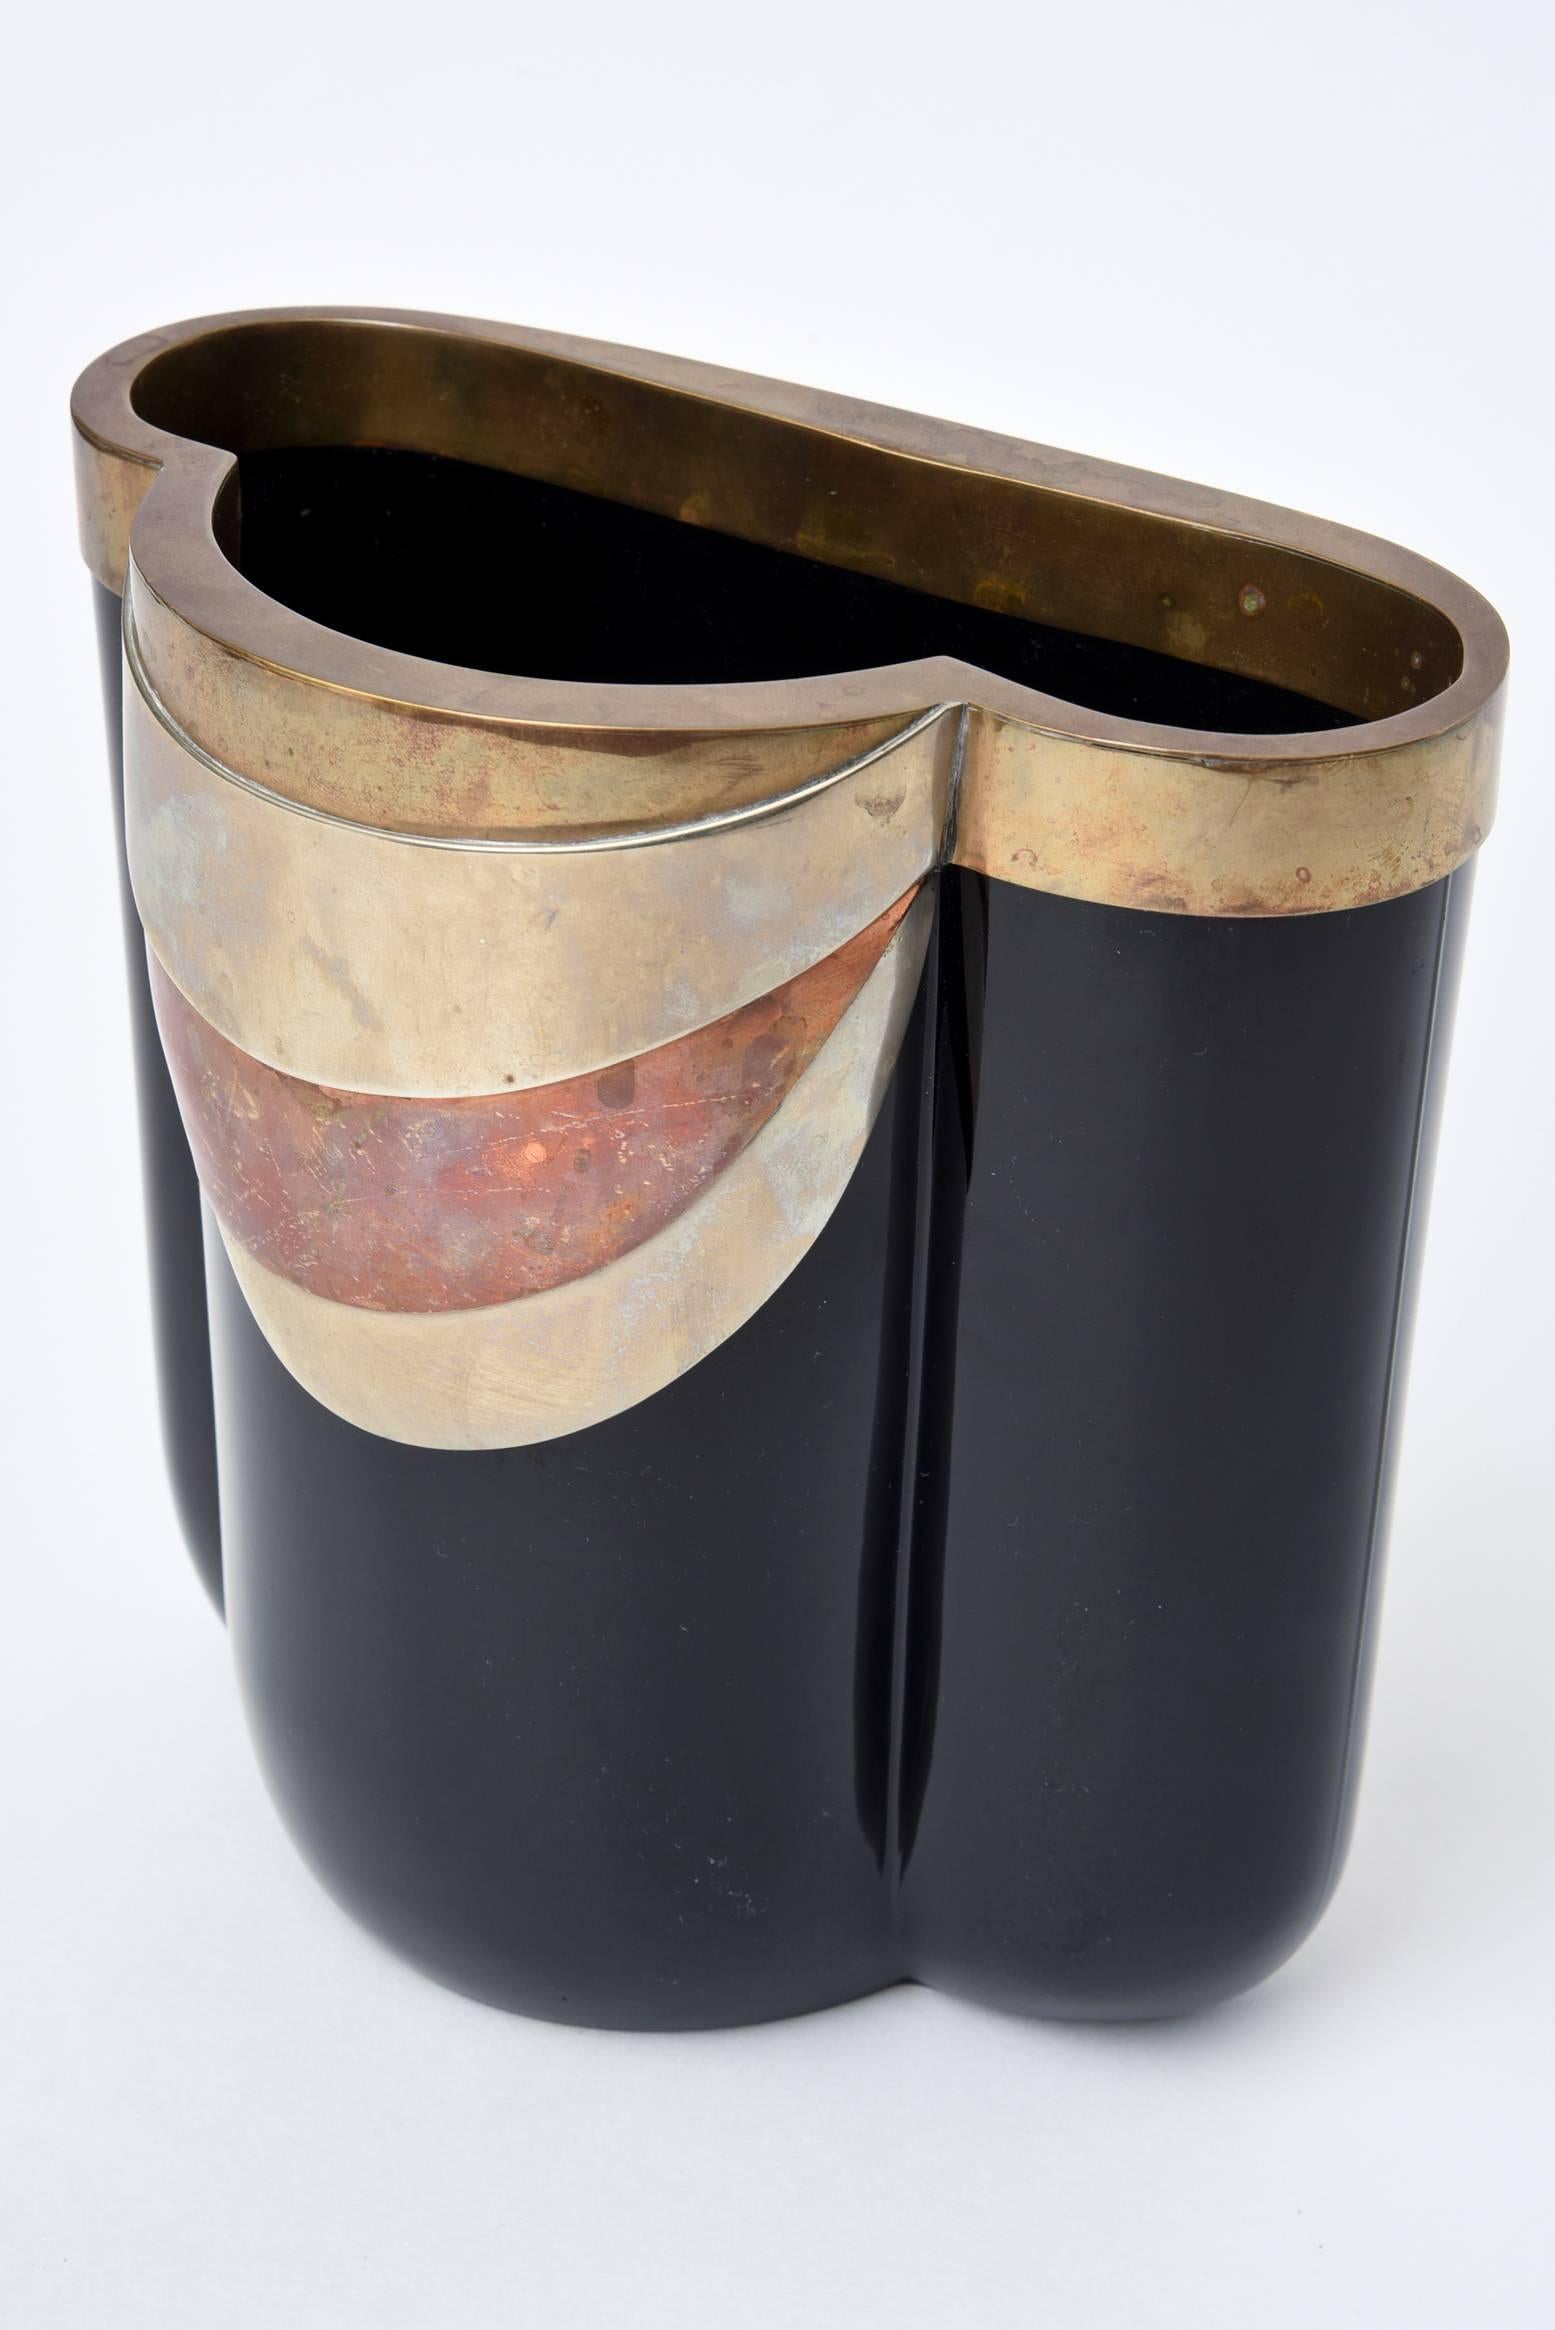 This stunning and never seen before rare vintage Italian Antonio Pavia Italian Murano vase is like a piece of jewelry or sculpture. The drape like form of the mixed metals of copper, brass, nickel are reminiscent of the influences of Egyptian